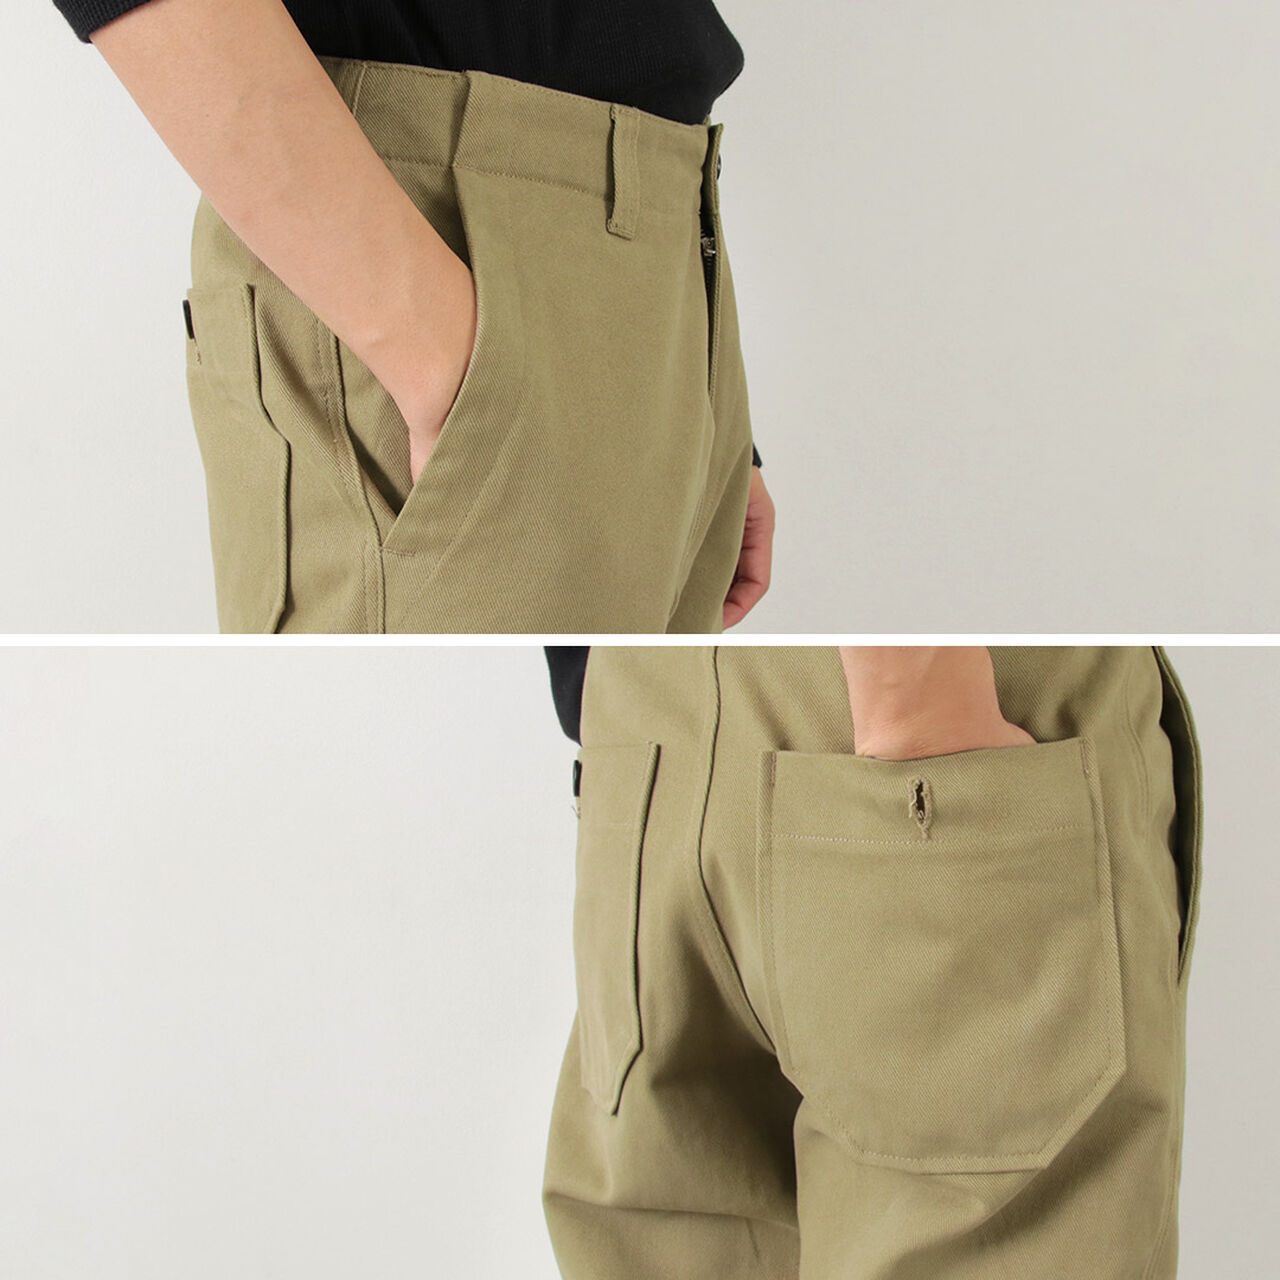 PARAGES Dock Twill Pants